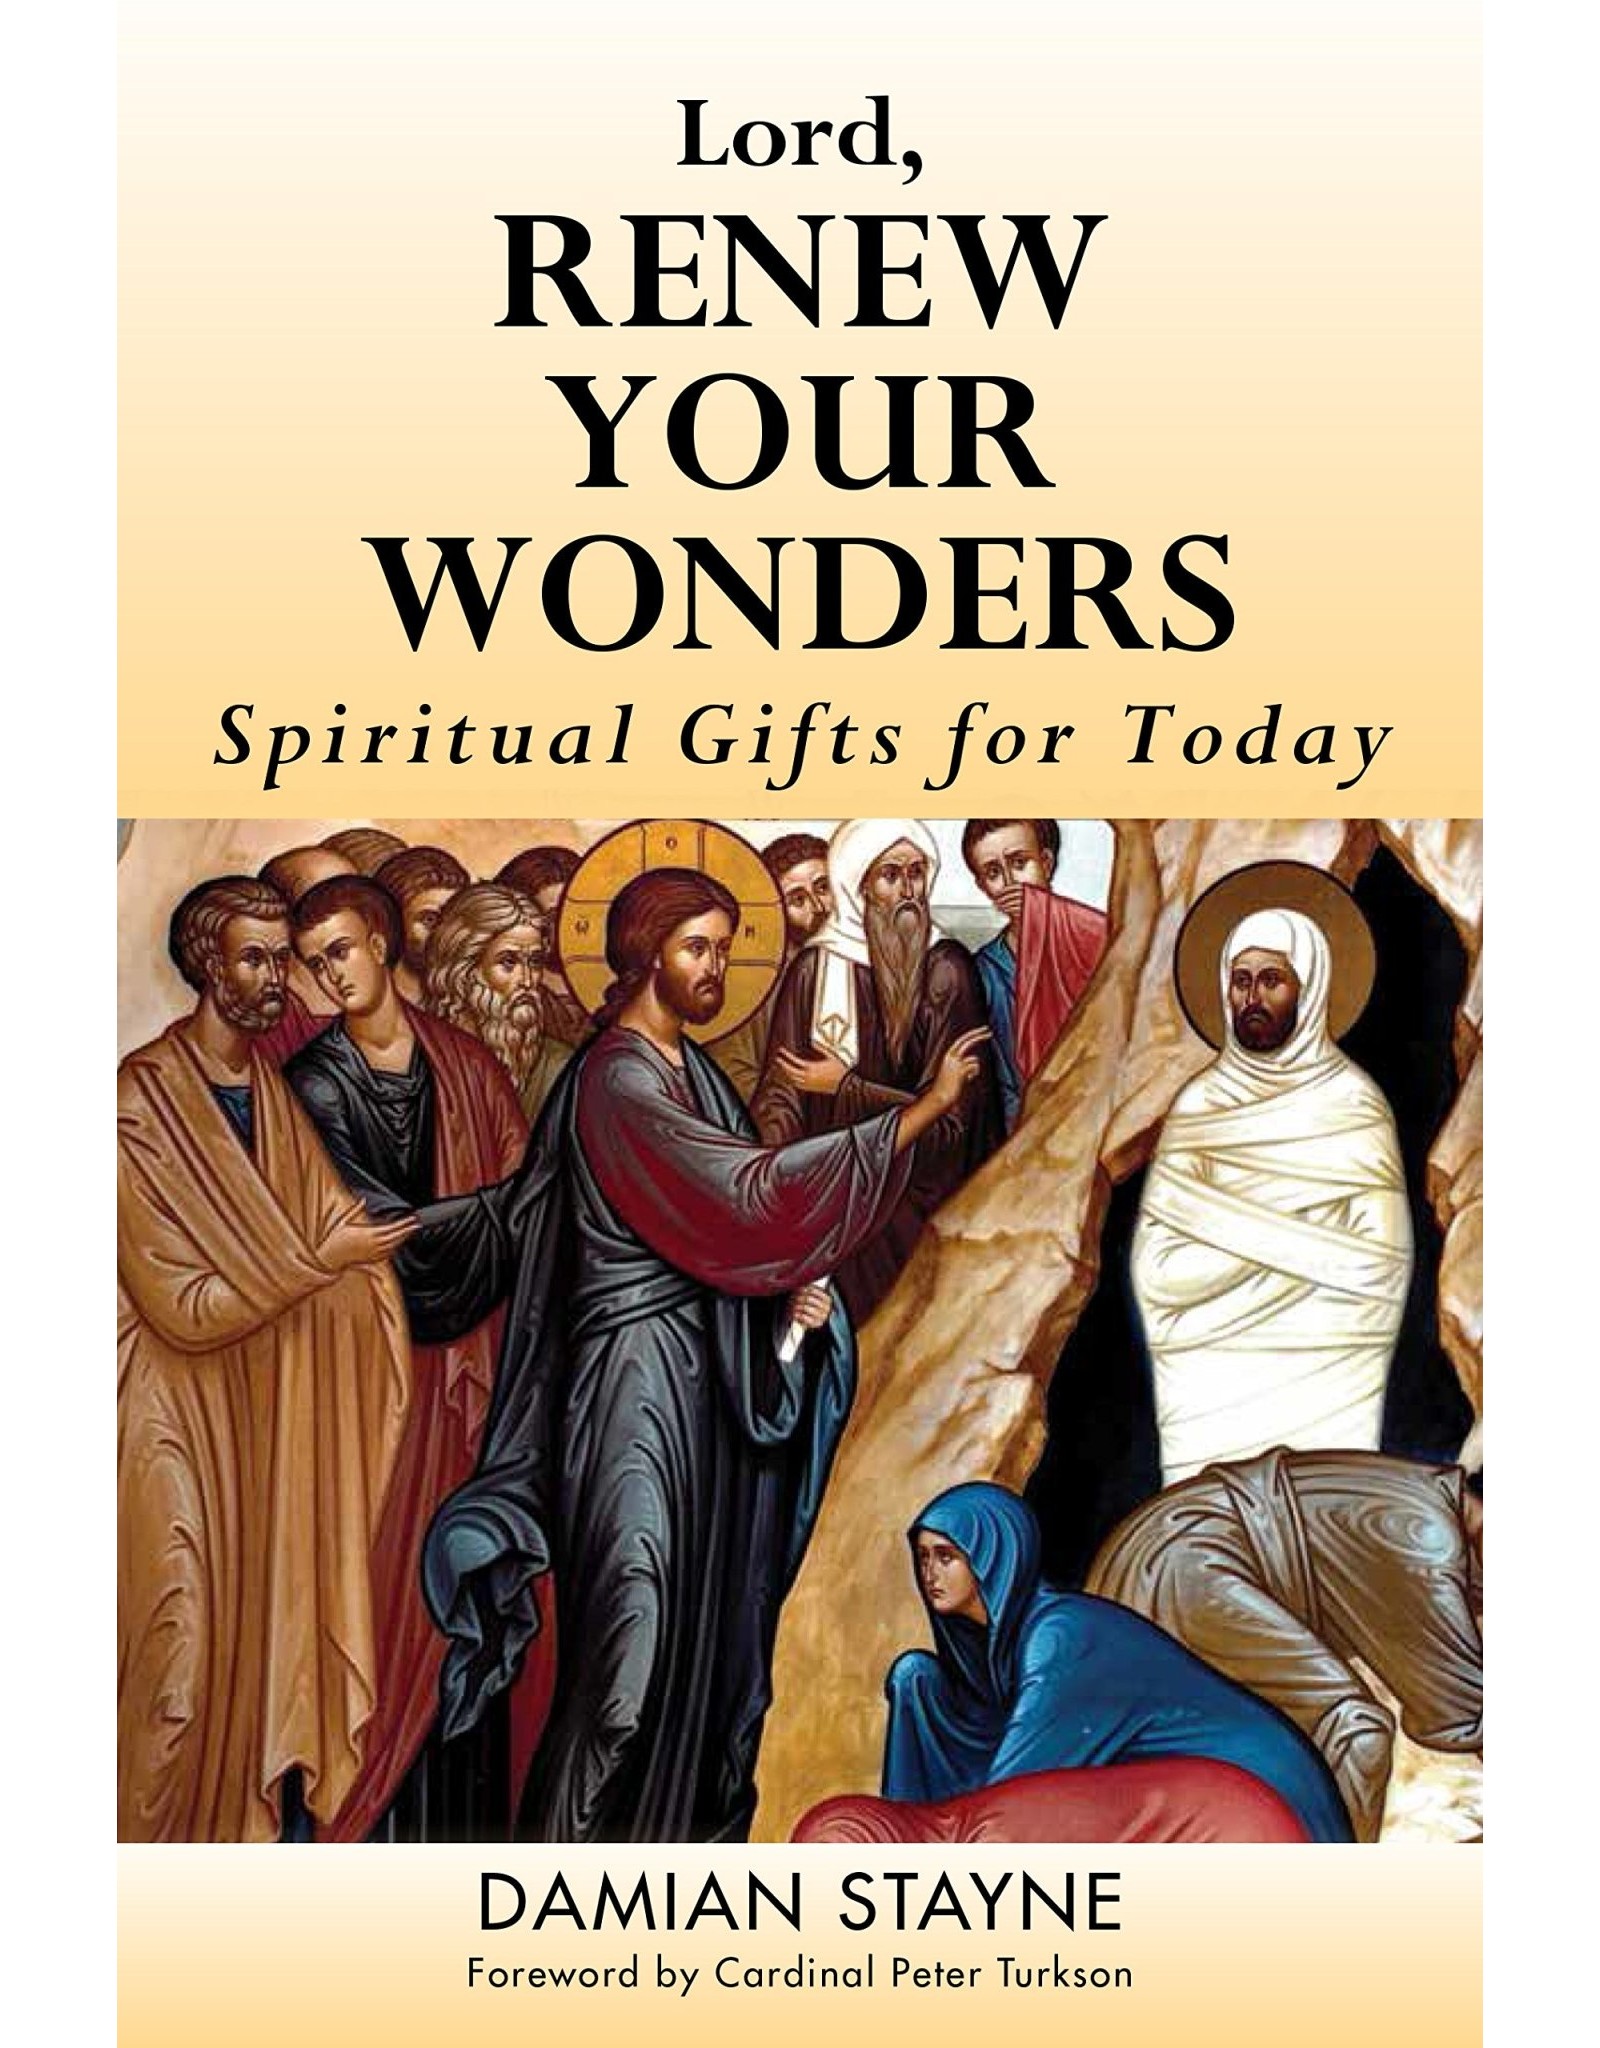 Lord, Renew Your Wonders: Spiritual Gifts for Today